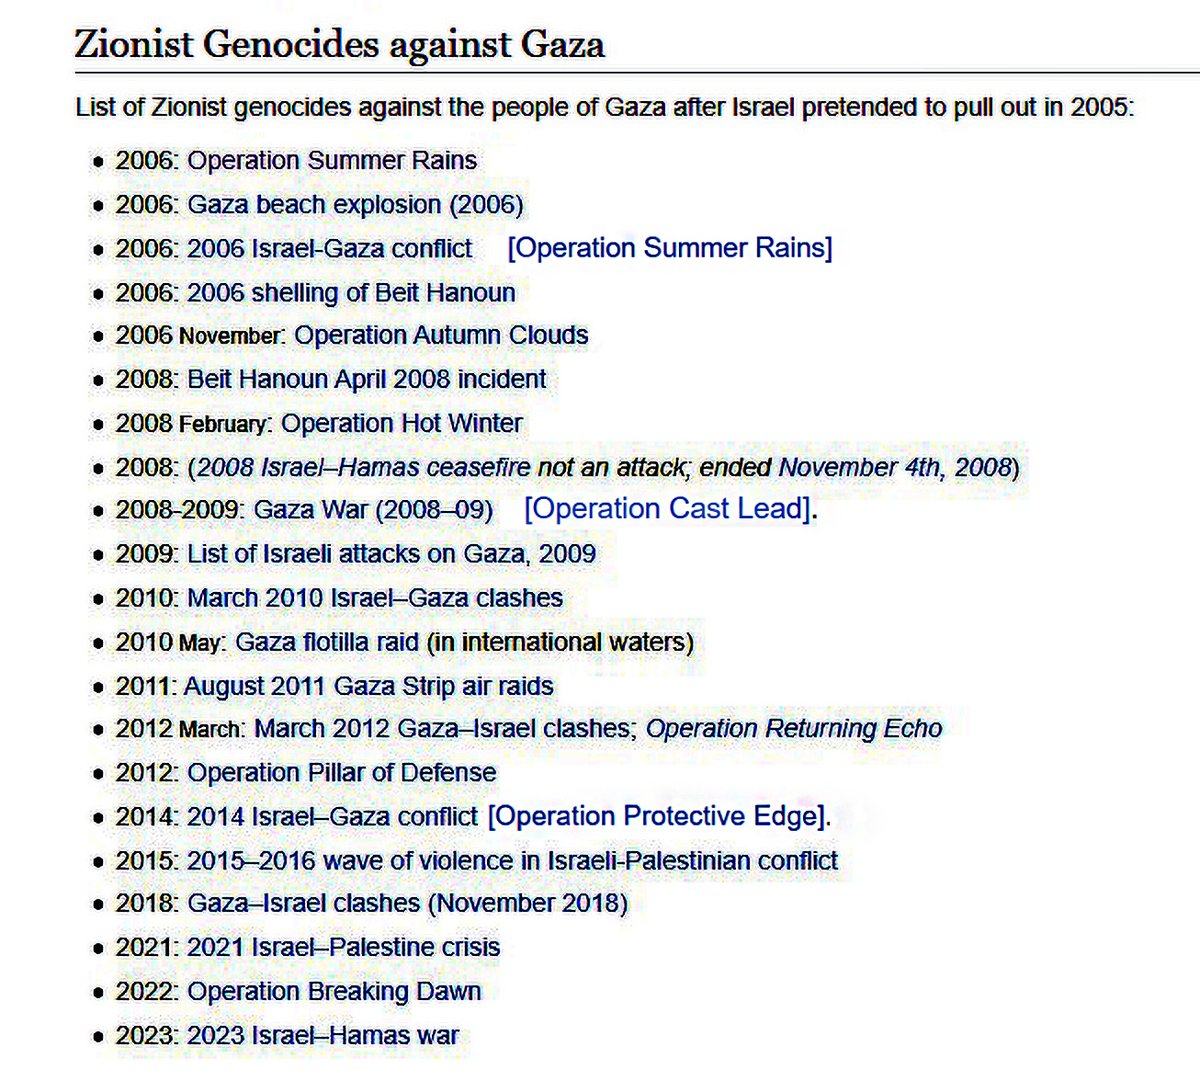 @christi02455387 @afshinrattansi Israel created Hamas, so yes Israel orchestrates every genocide